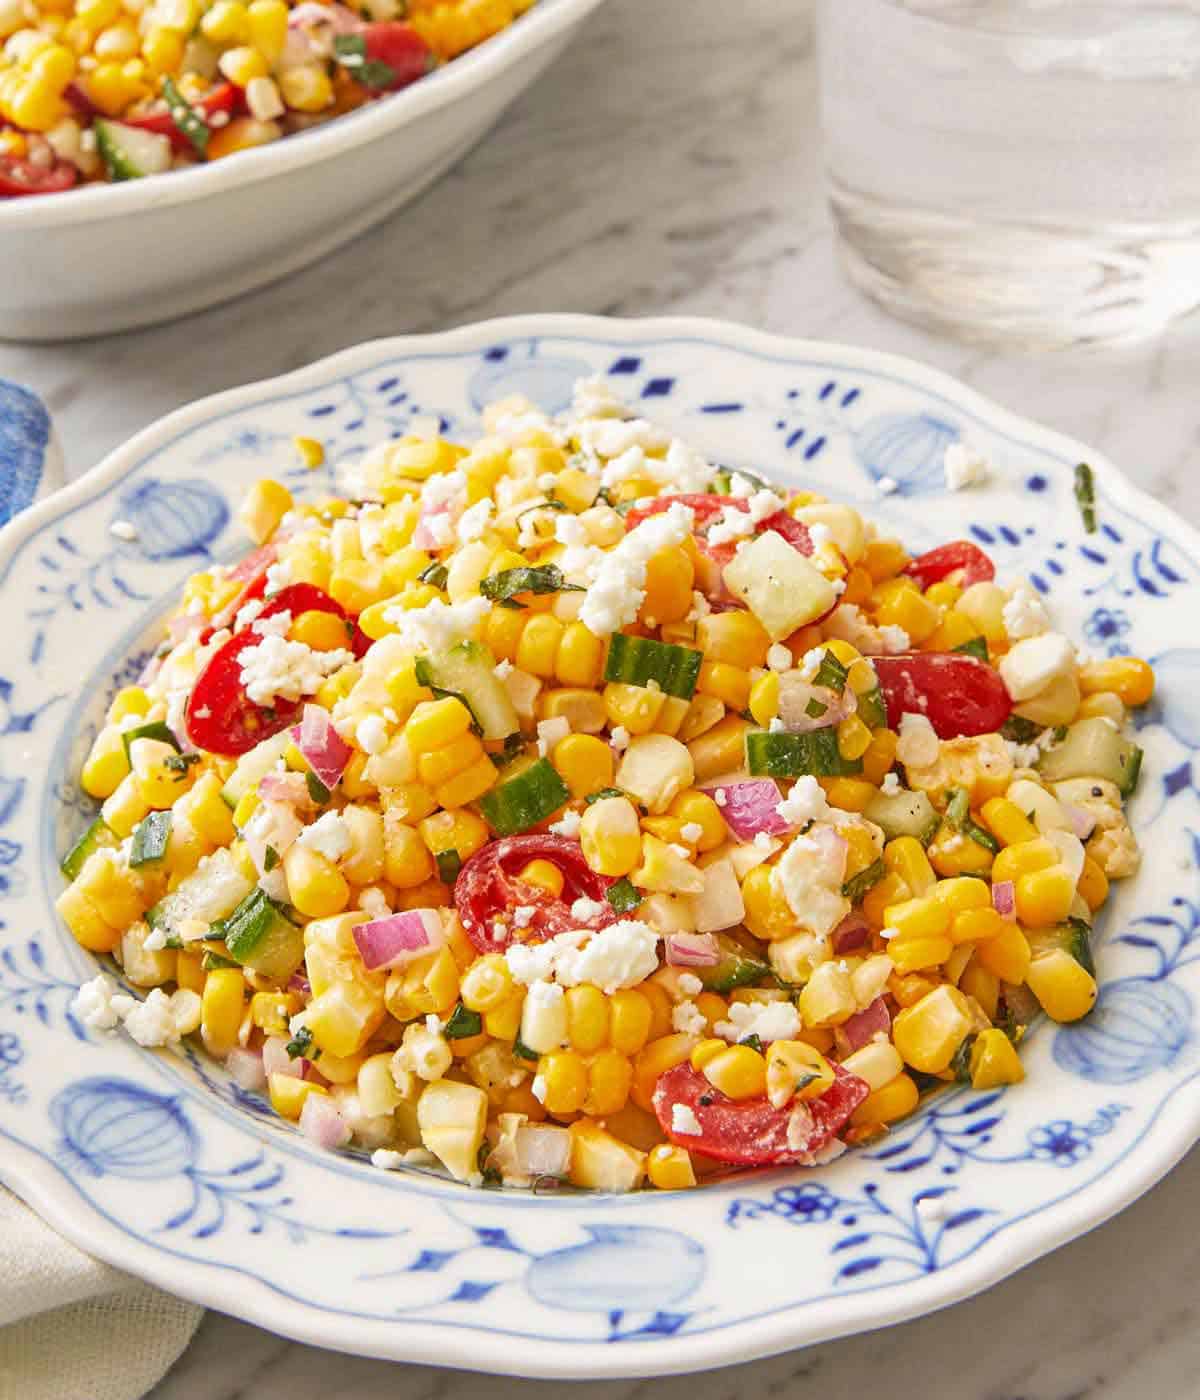 A plate of corn salad with crumbled feta on top.